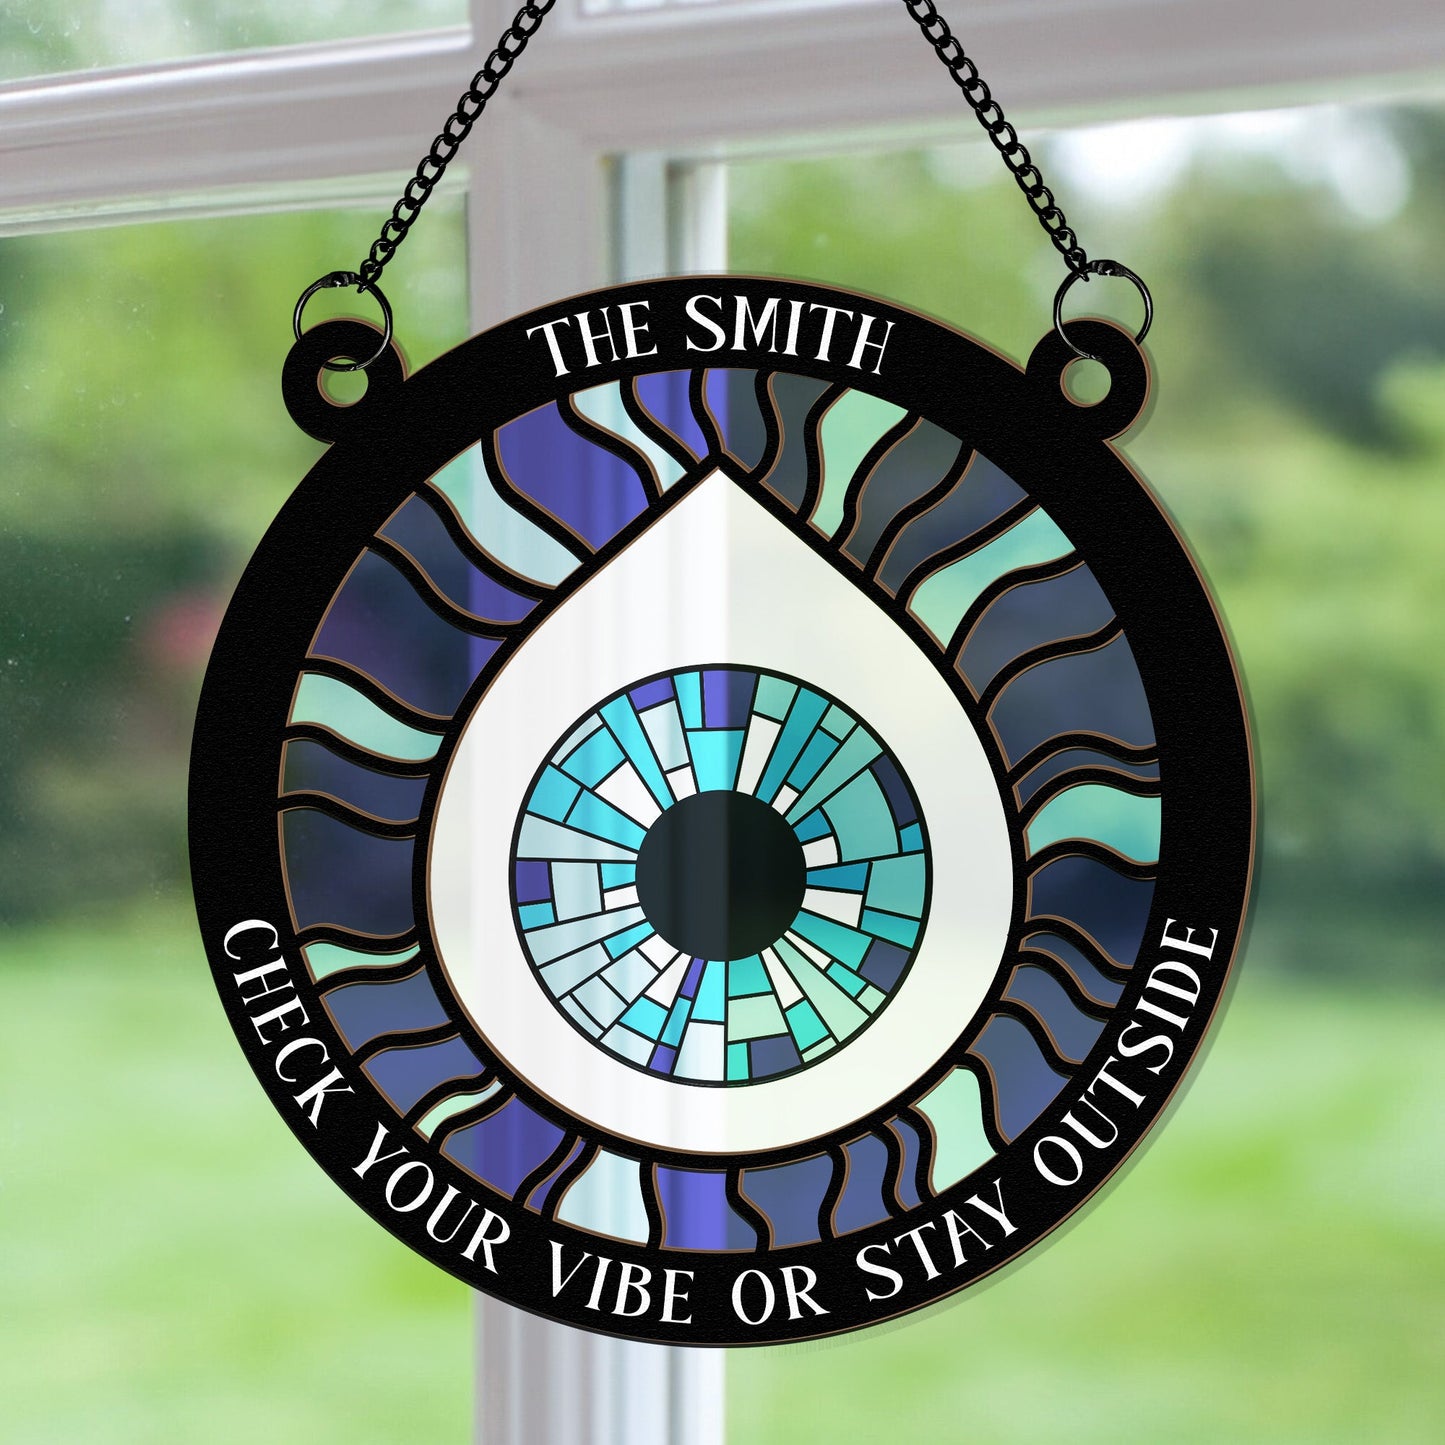 Evil Eye Check Your Vibe Or Stay Outside - Personalized Window Hanging Suncatcher Ornament